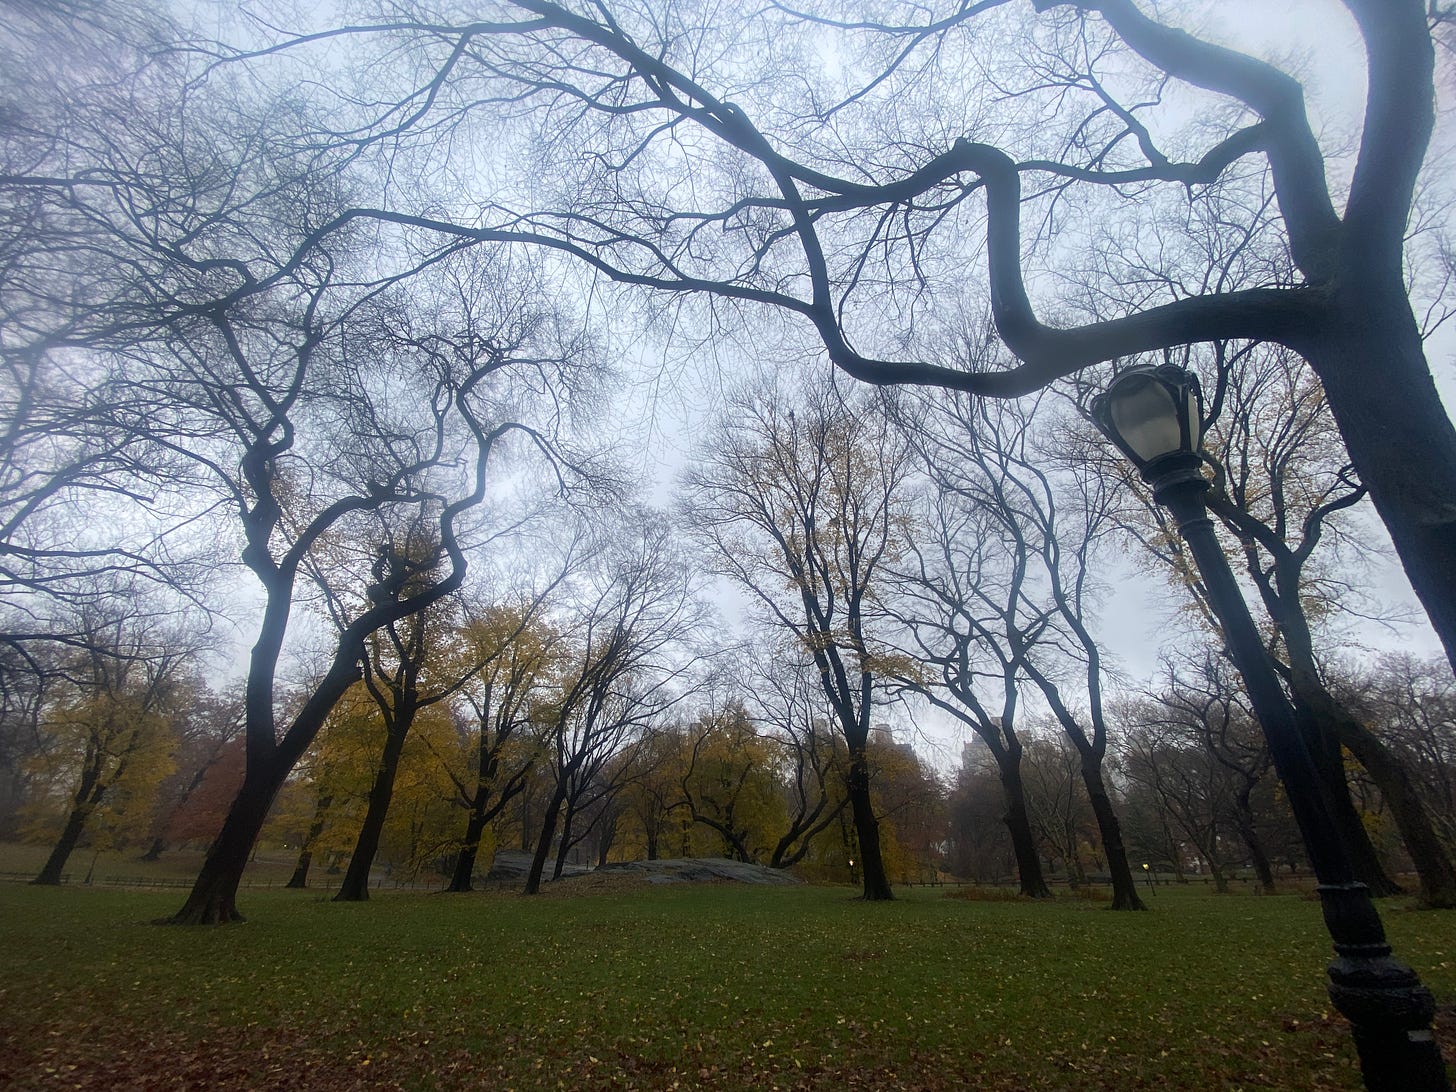 A picture of trees, some with leaves, some without, with green grass and leaves on the ground. Central Park, NY.